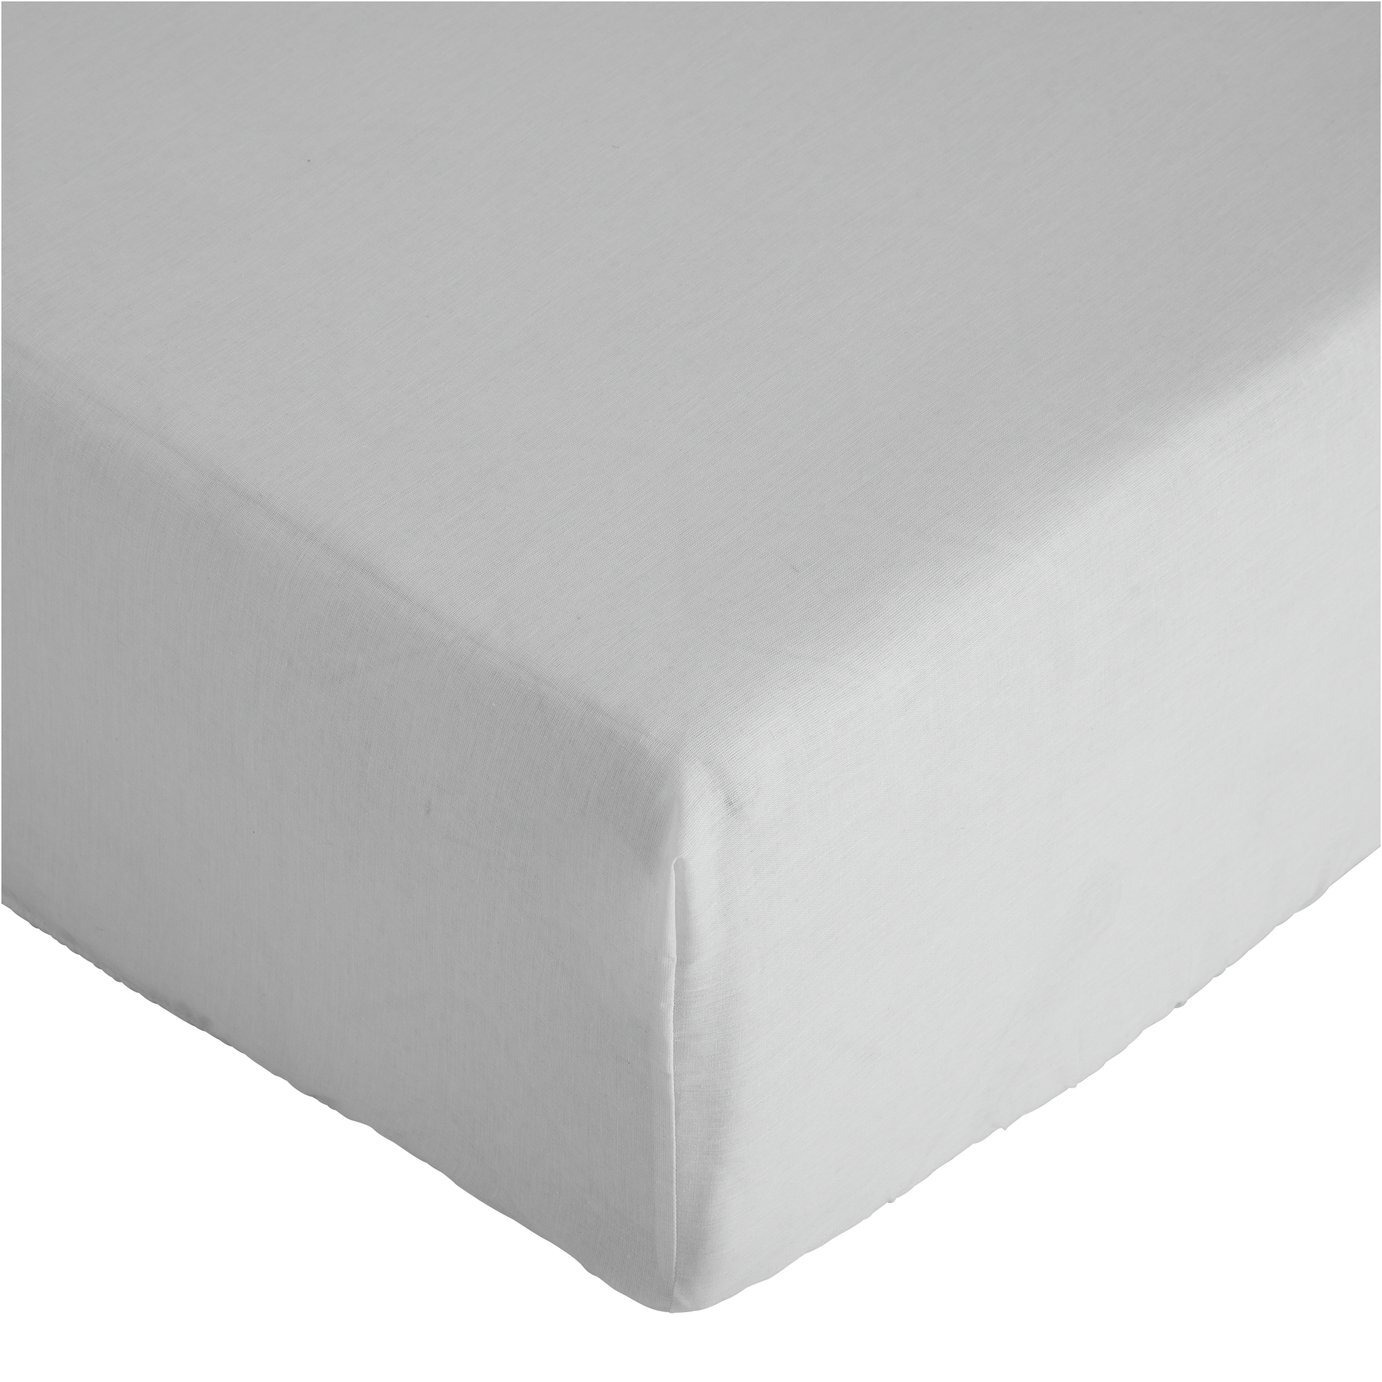 Argos Home Plain White Fitted Sheet - Superking - image 1